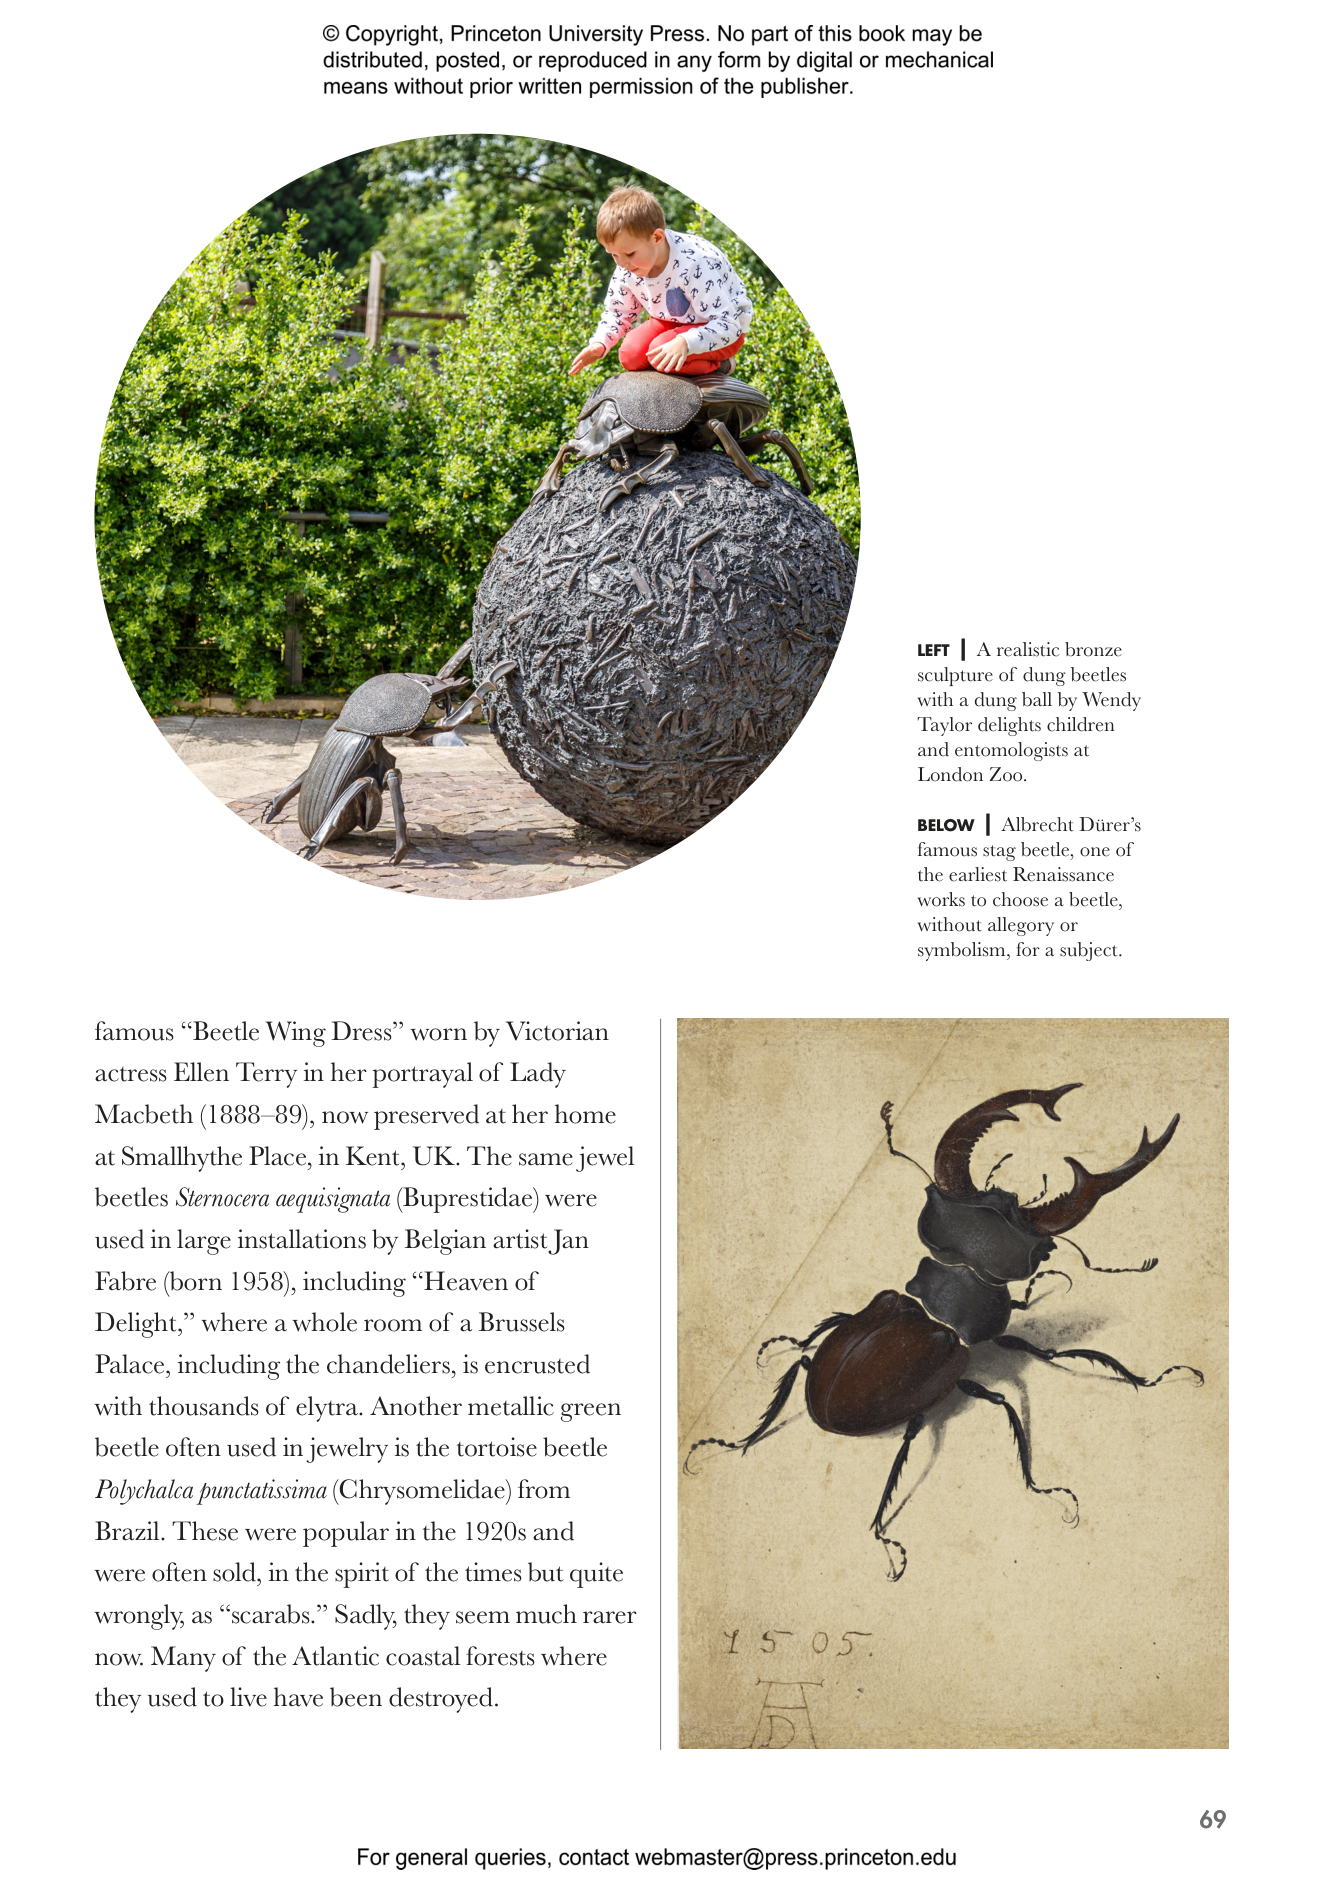 Stag beetle – The Lawrence Hall of Science